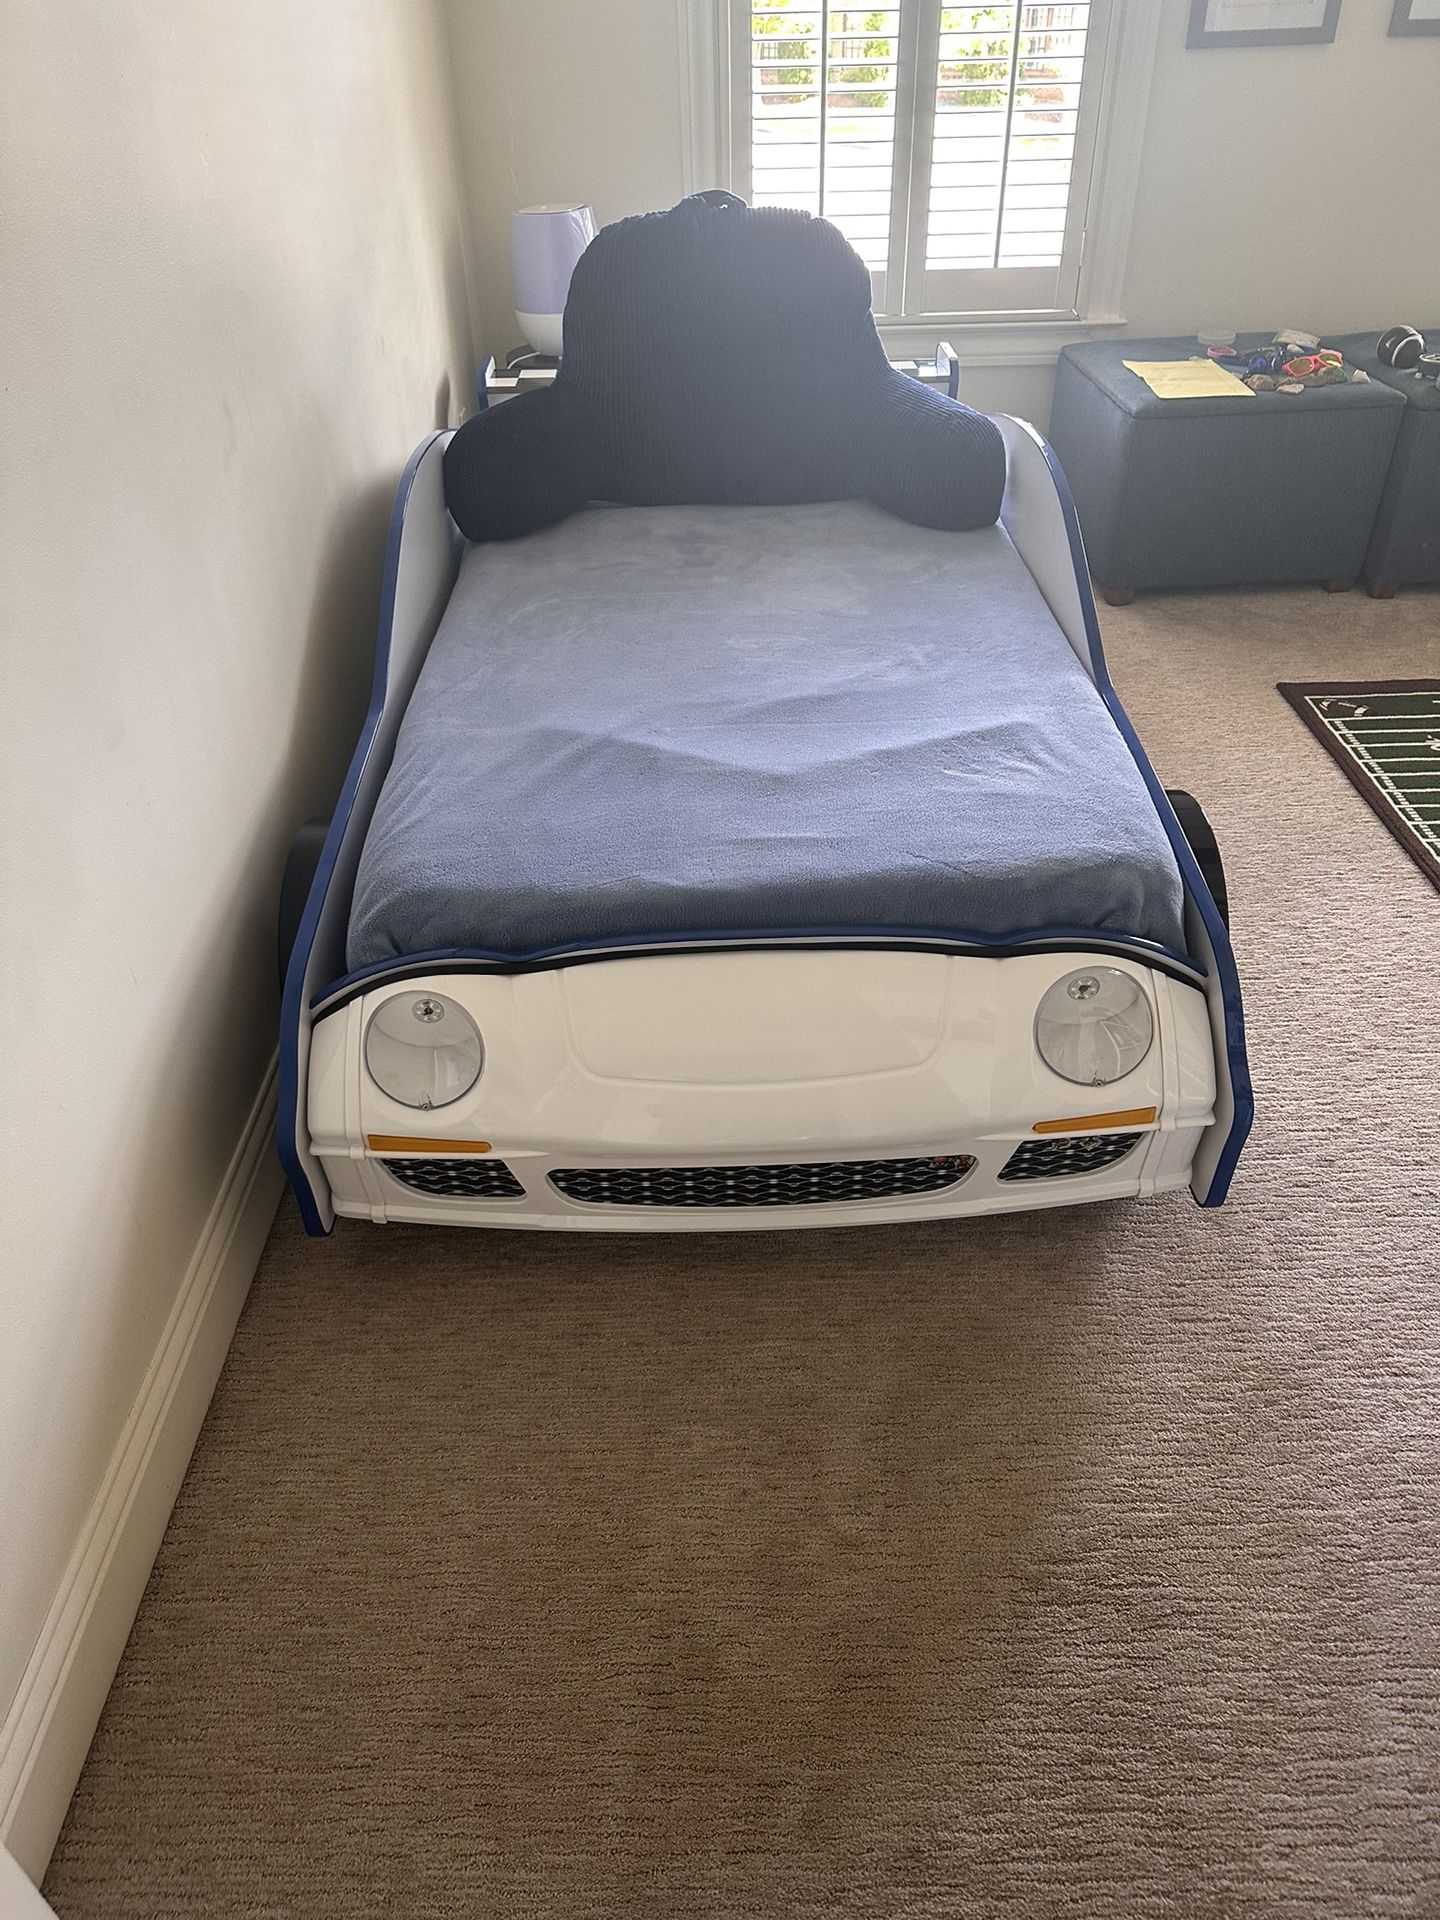 Twin Police Car Bed in Excellent Condition (OBO/Price Negotiable)